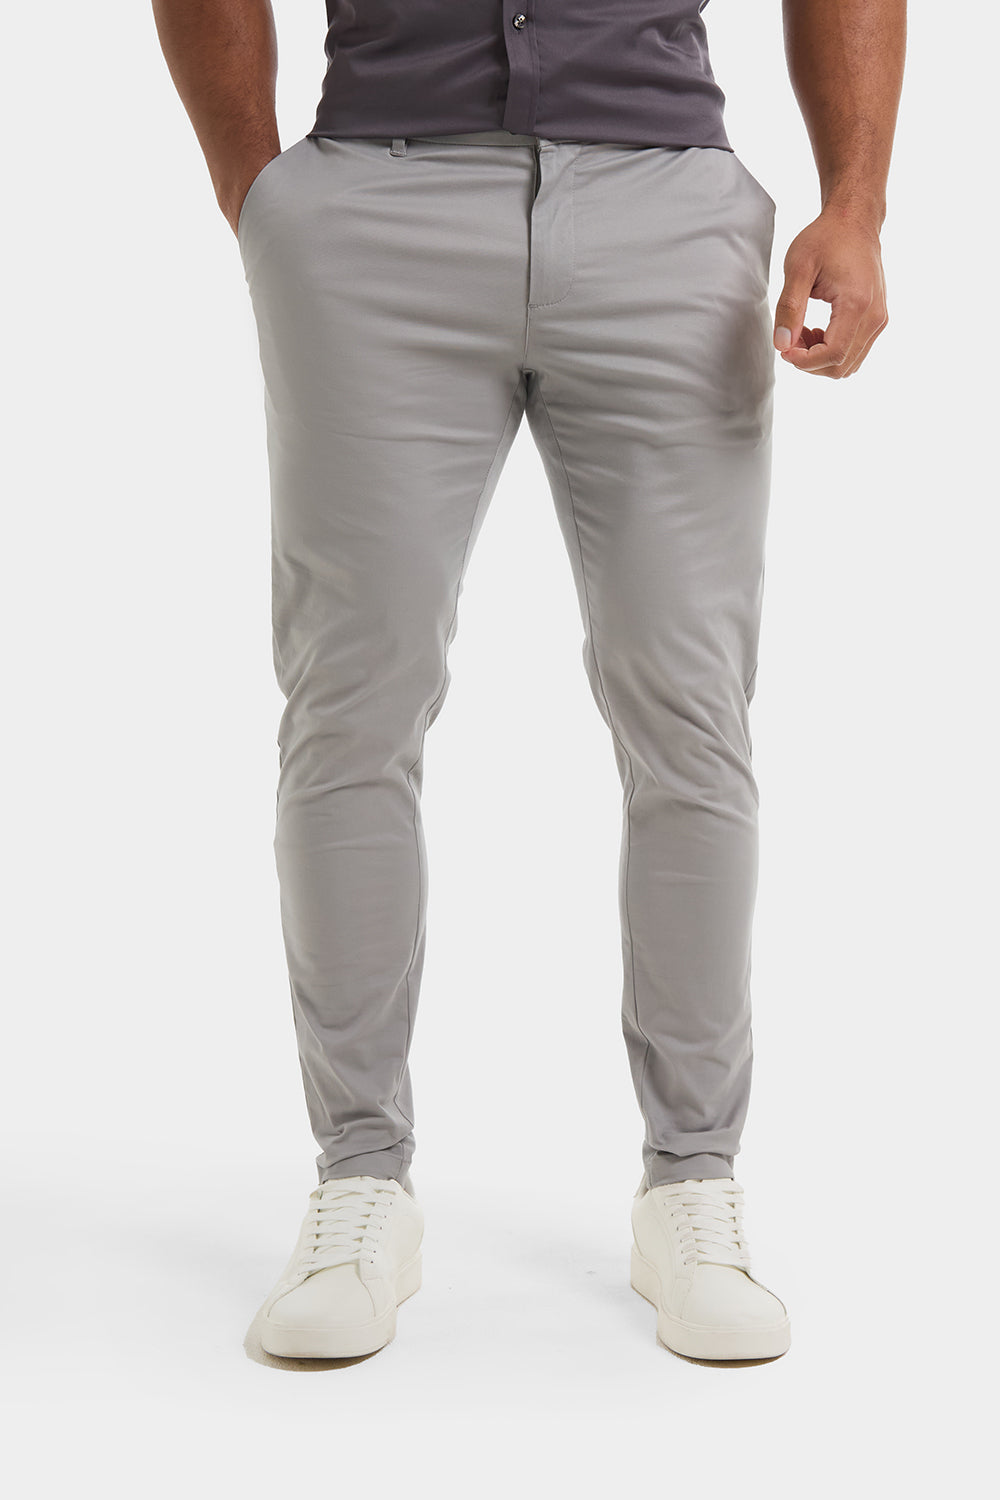 Athletic Fit Cotton Stretch Chino Pants in Pale Grey - TAILORED 